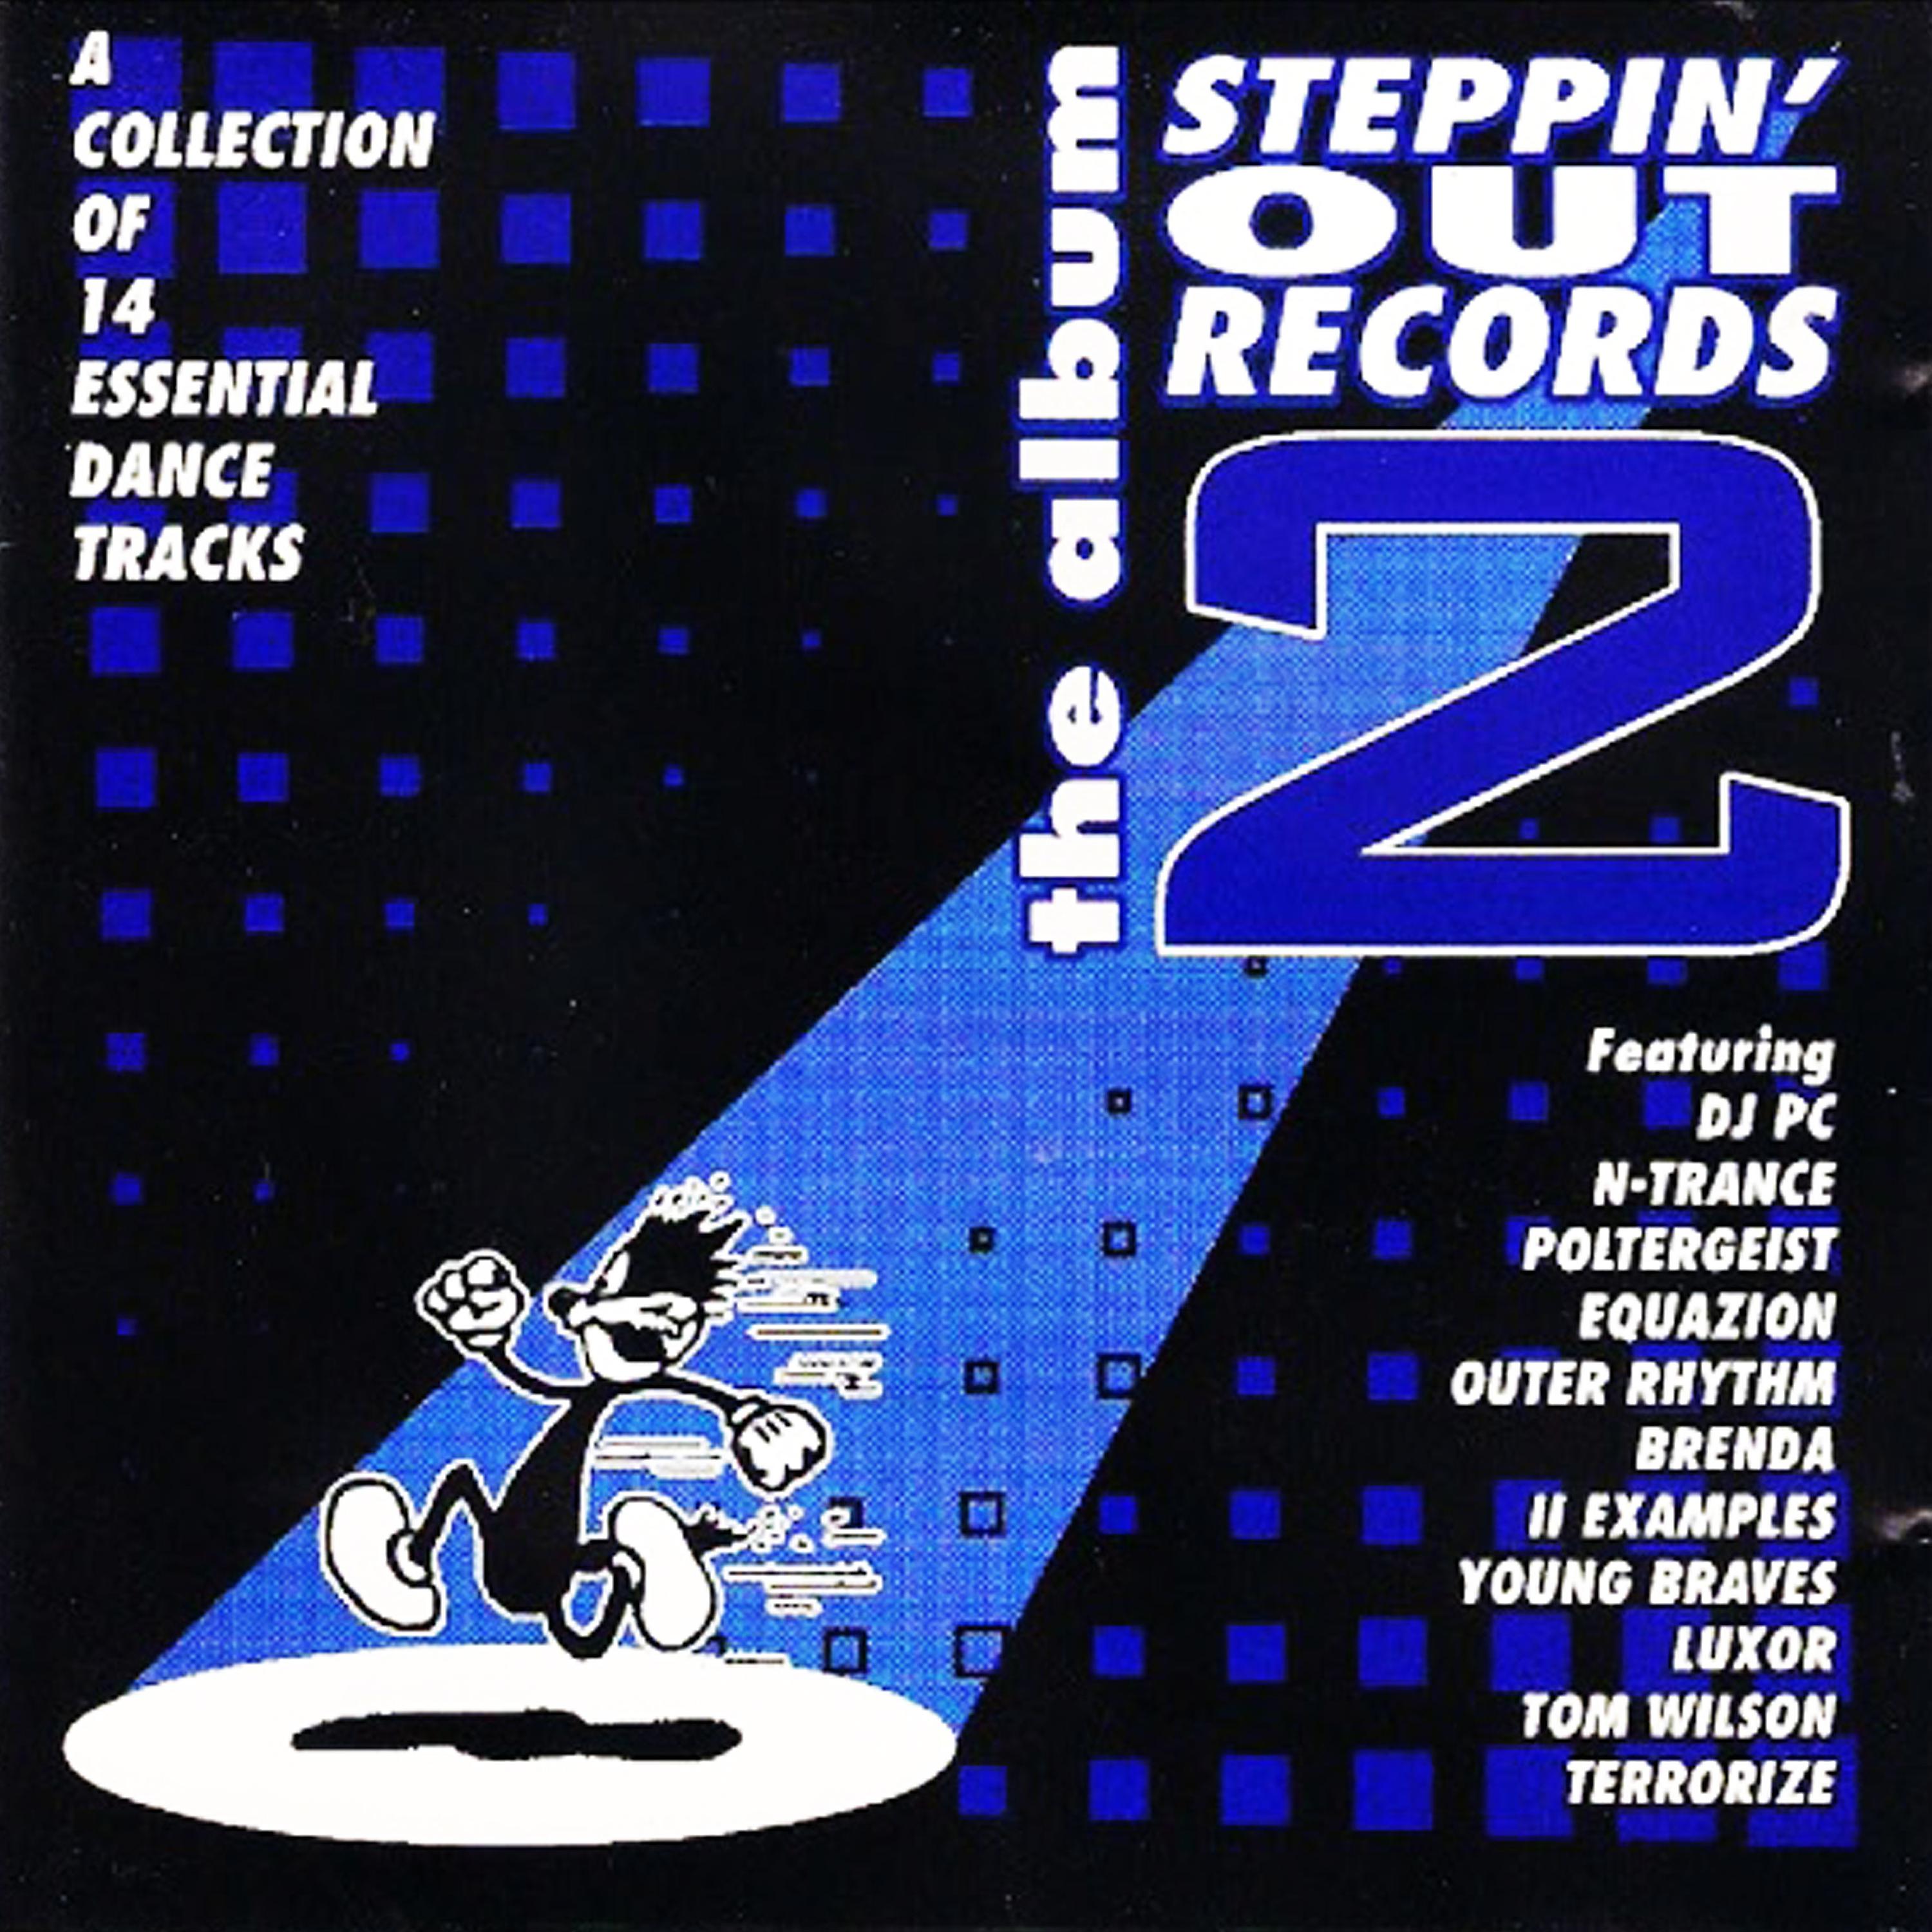 Постер альбома Steppin' out Records 2 - the Album - 14 Essential Dance Tracks